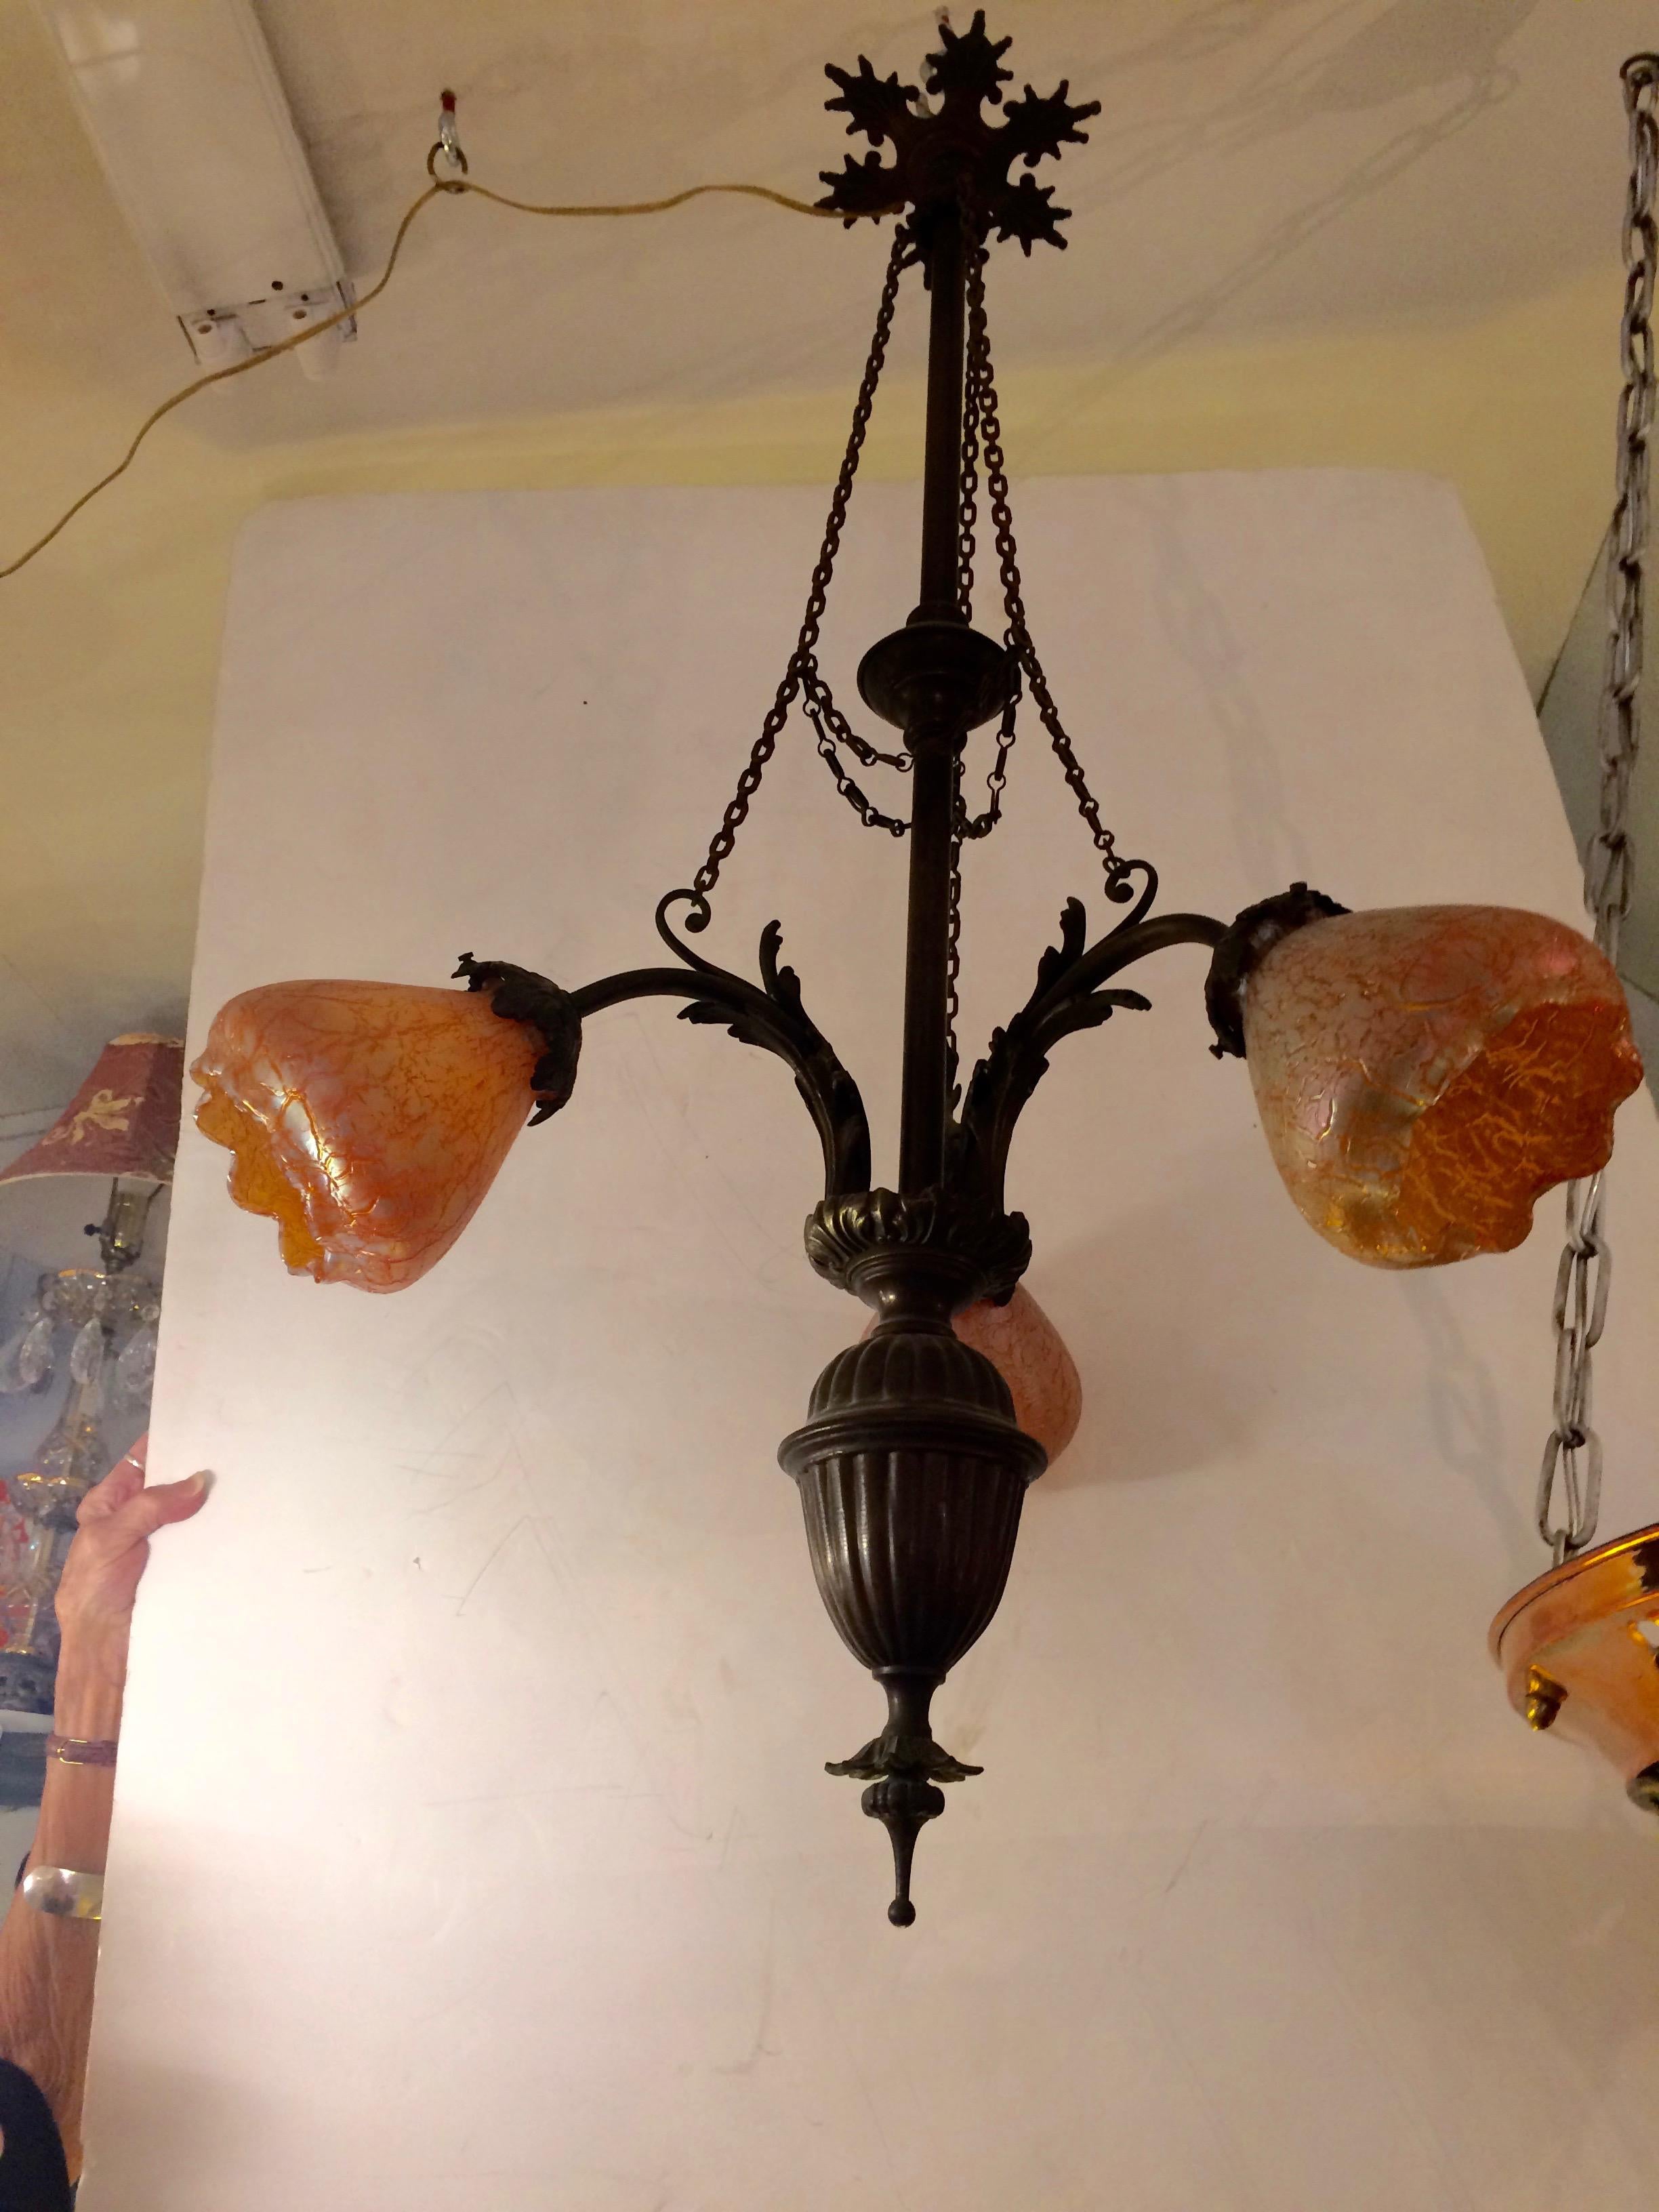 Gorgeous bronze and brass Art Nouveau light fixture having an elongated structure, lovely wheel-like ceiling cap and three arms displaying soft tangerine colored crinkle glass and scalloped shades. Original finish, rewired, 40 watt each max.